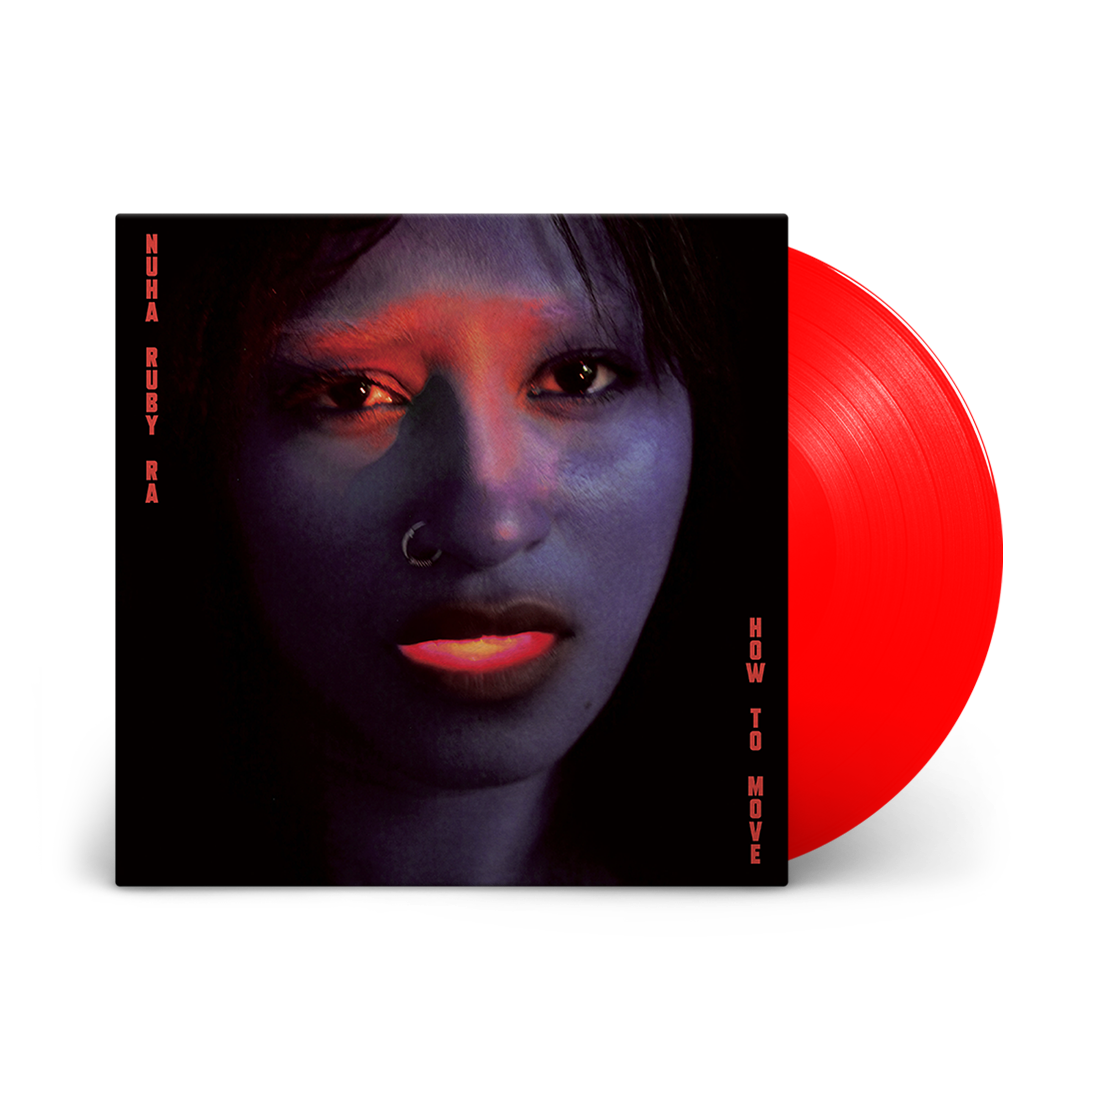 How To Move: Signed Transparent Red Vinyl EP